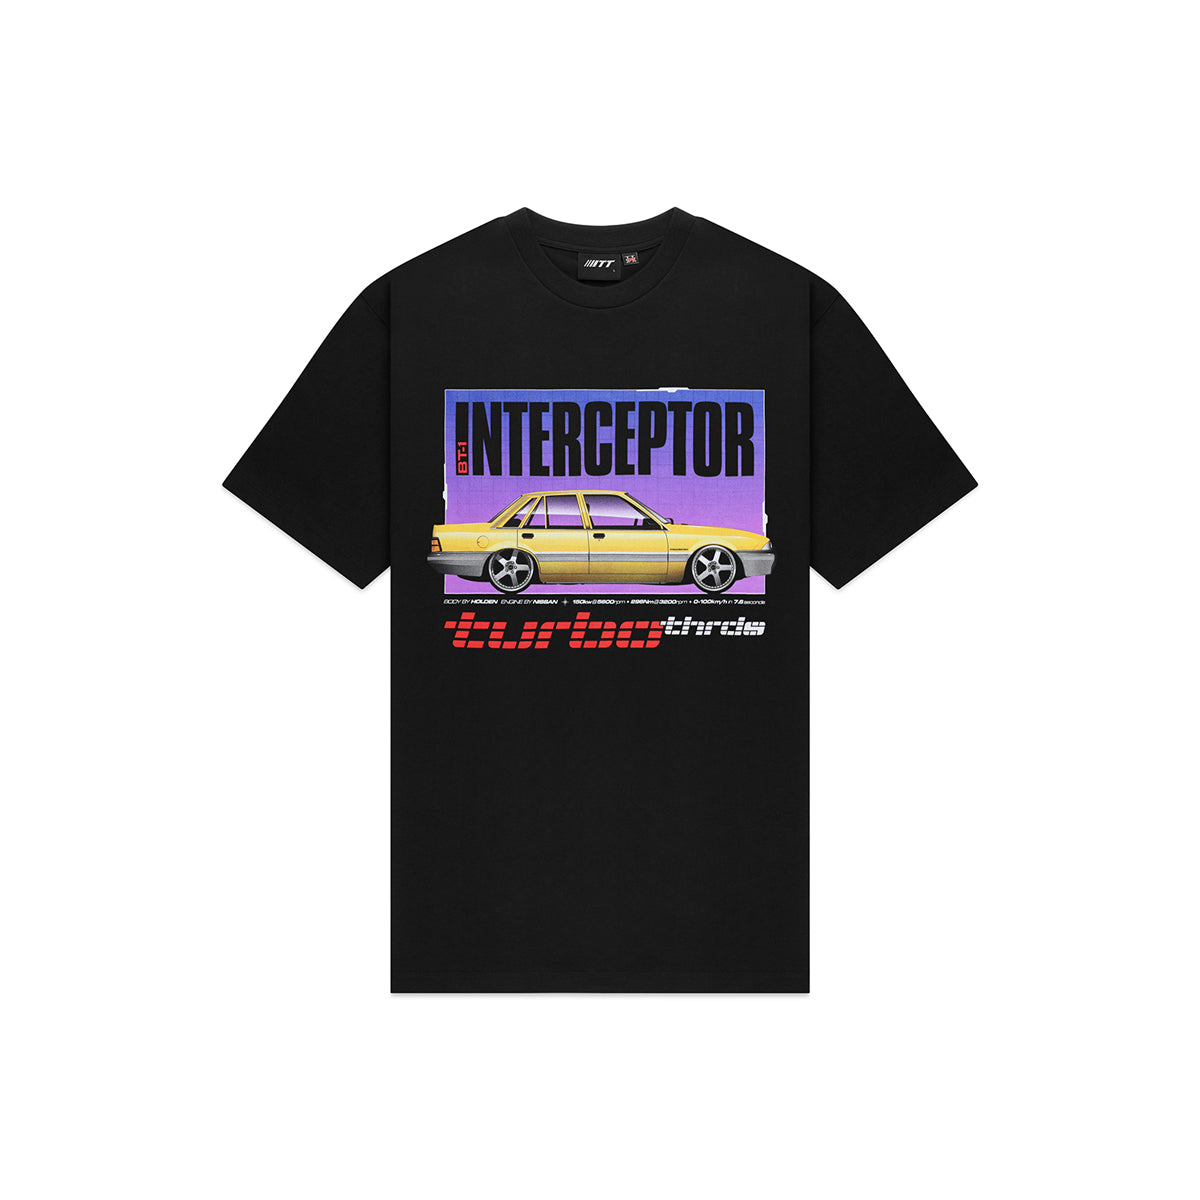 Turbo Threads Black Box Fit Tee with Interceptor text, red turbo threads logo and yellow Holden VL model